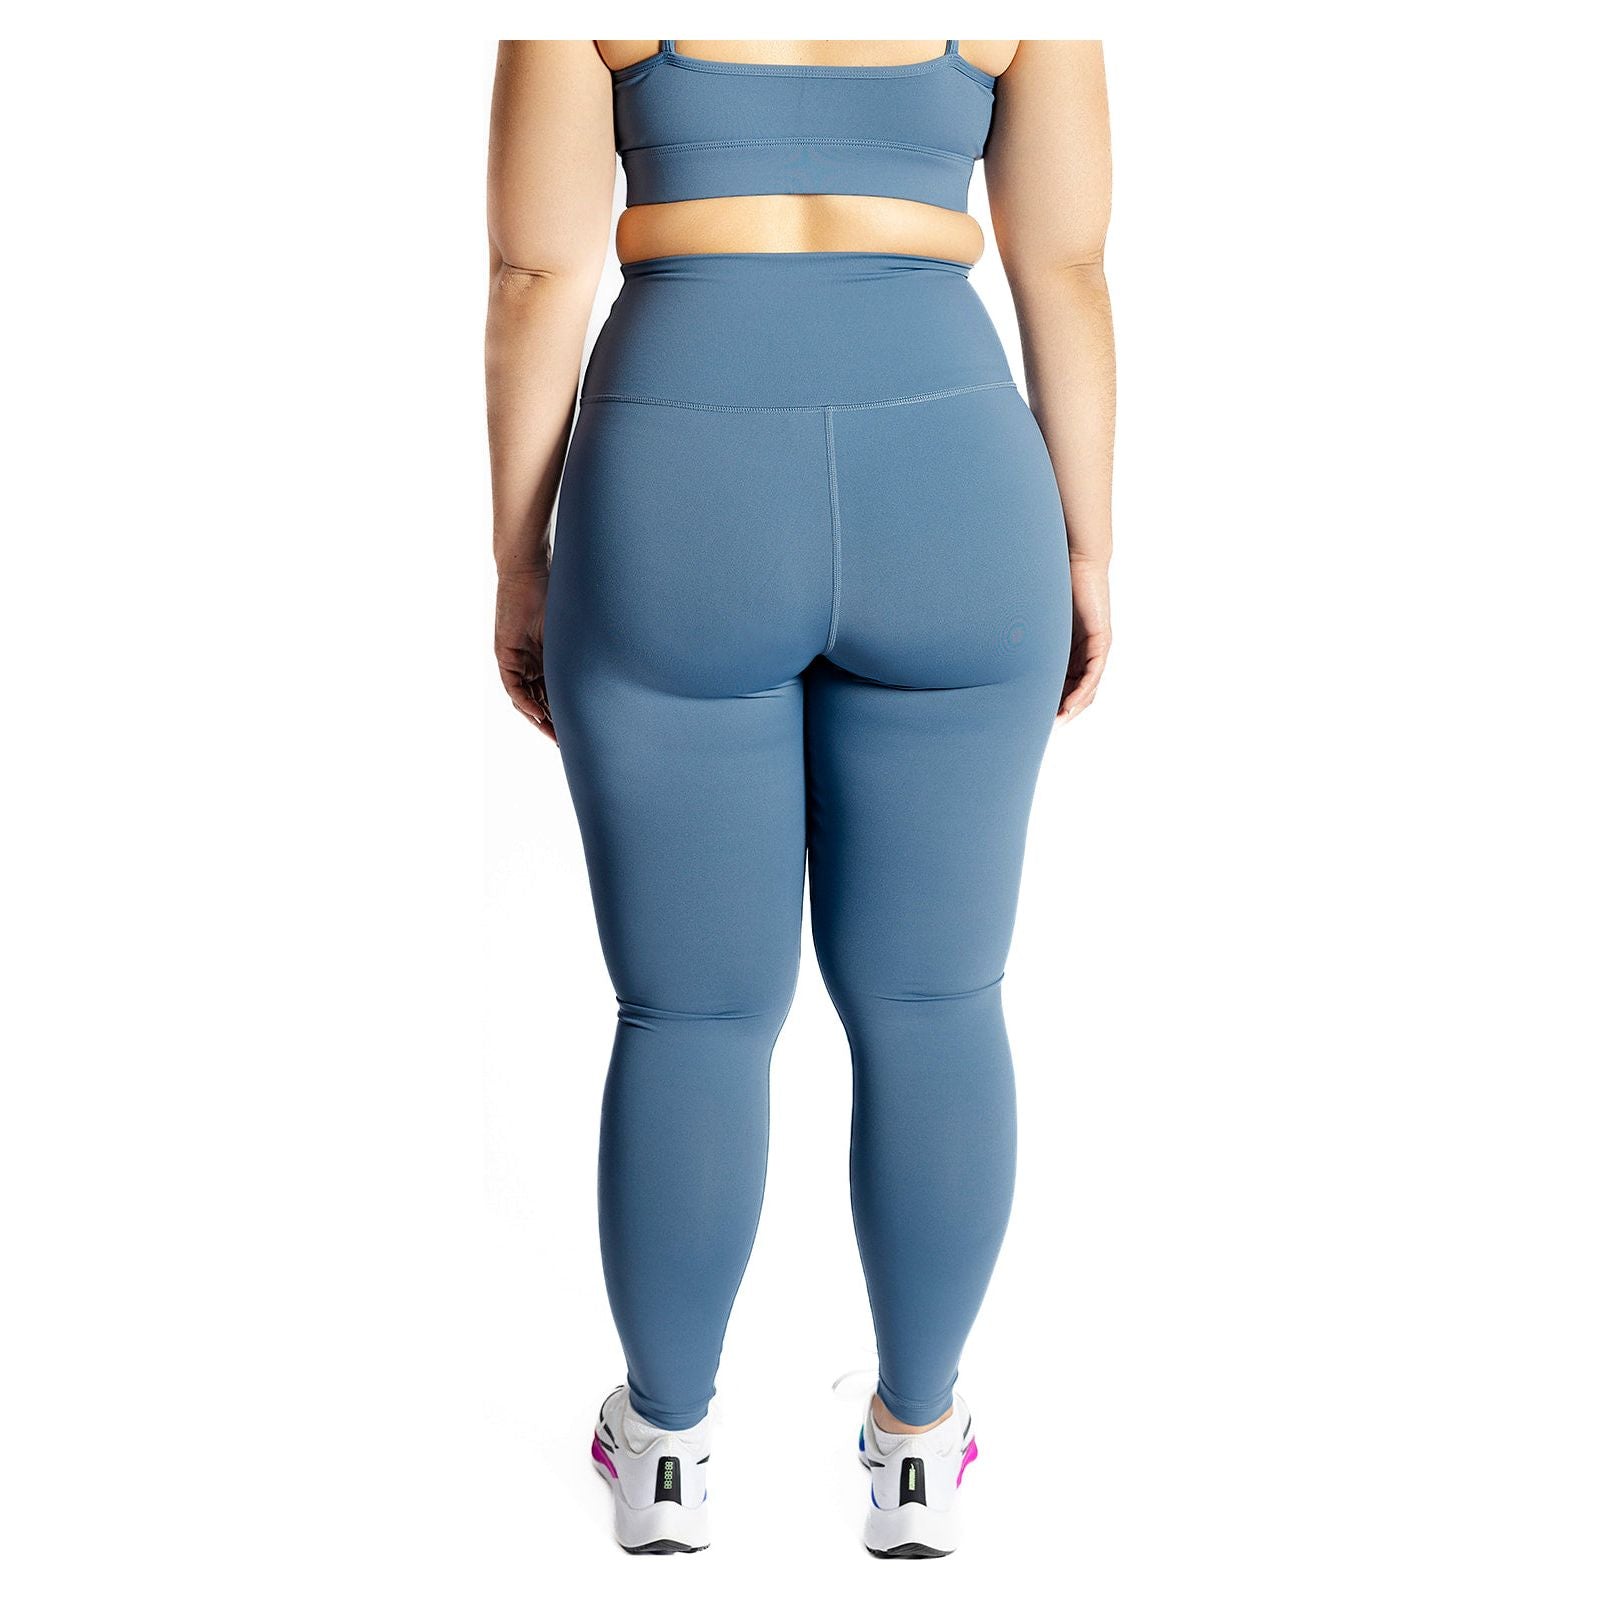 Pin by Amber Sullivan on fill the closest with Zyia  Bra size guide, Squat  proof leggings, Active wear outfits